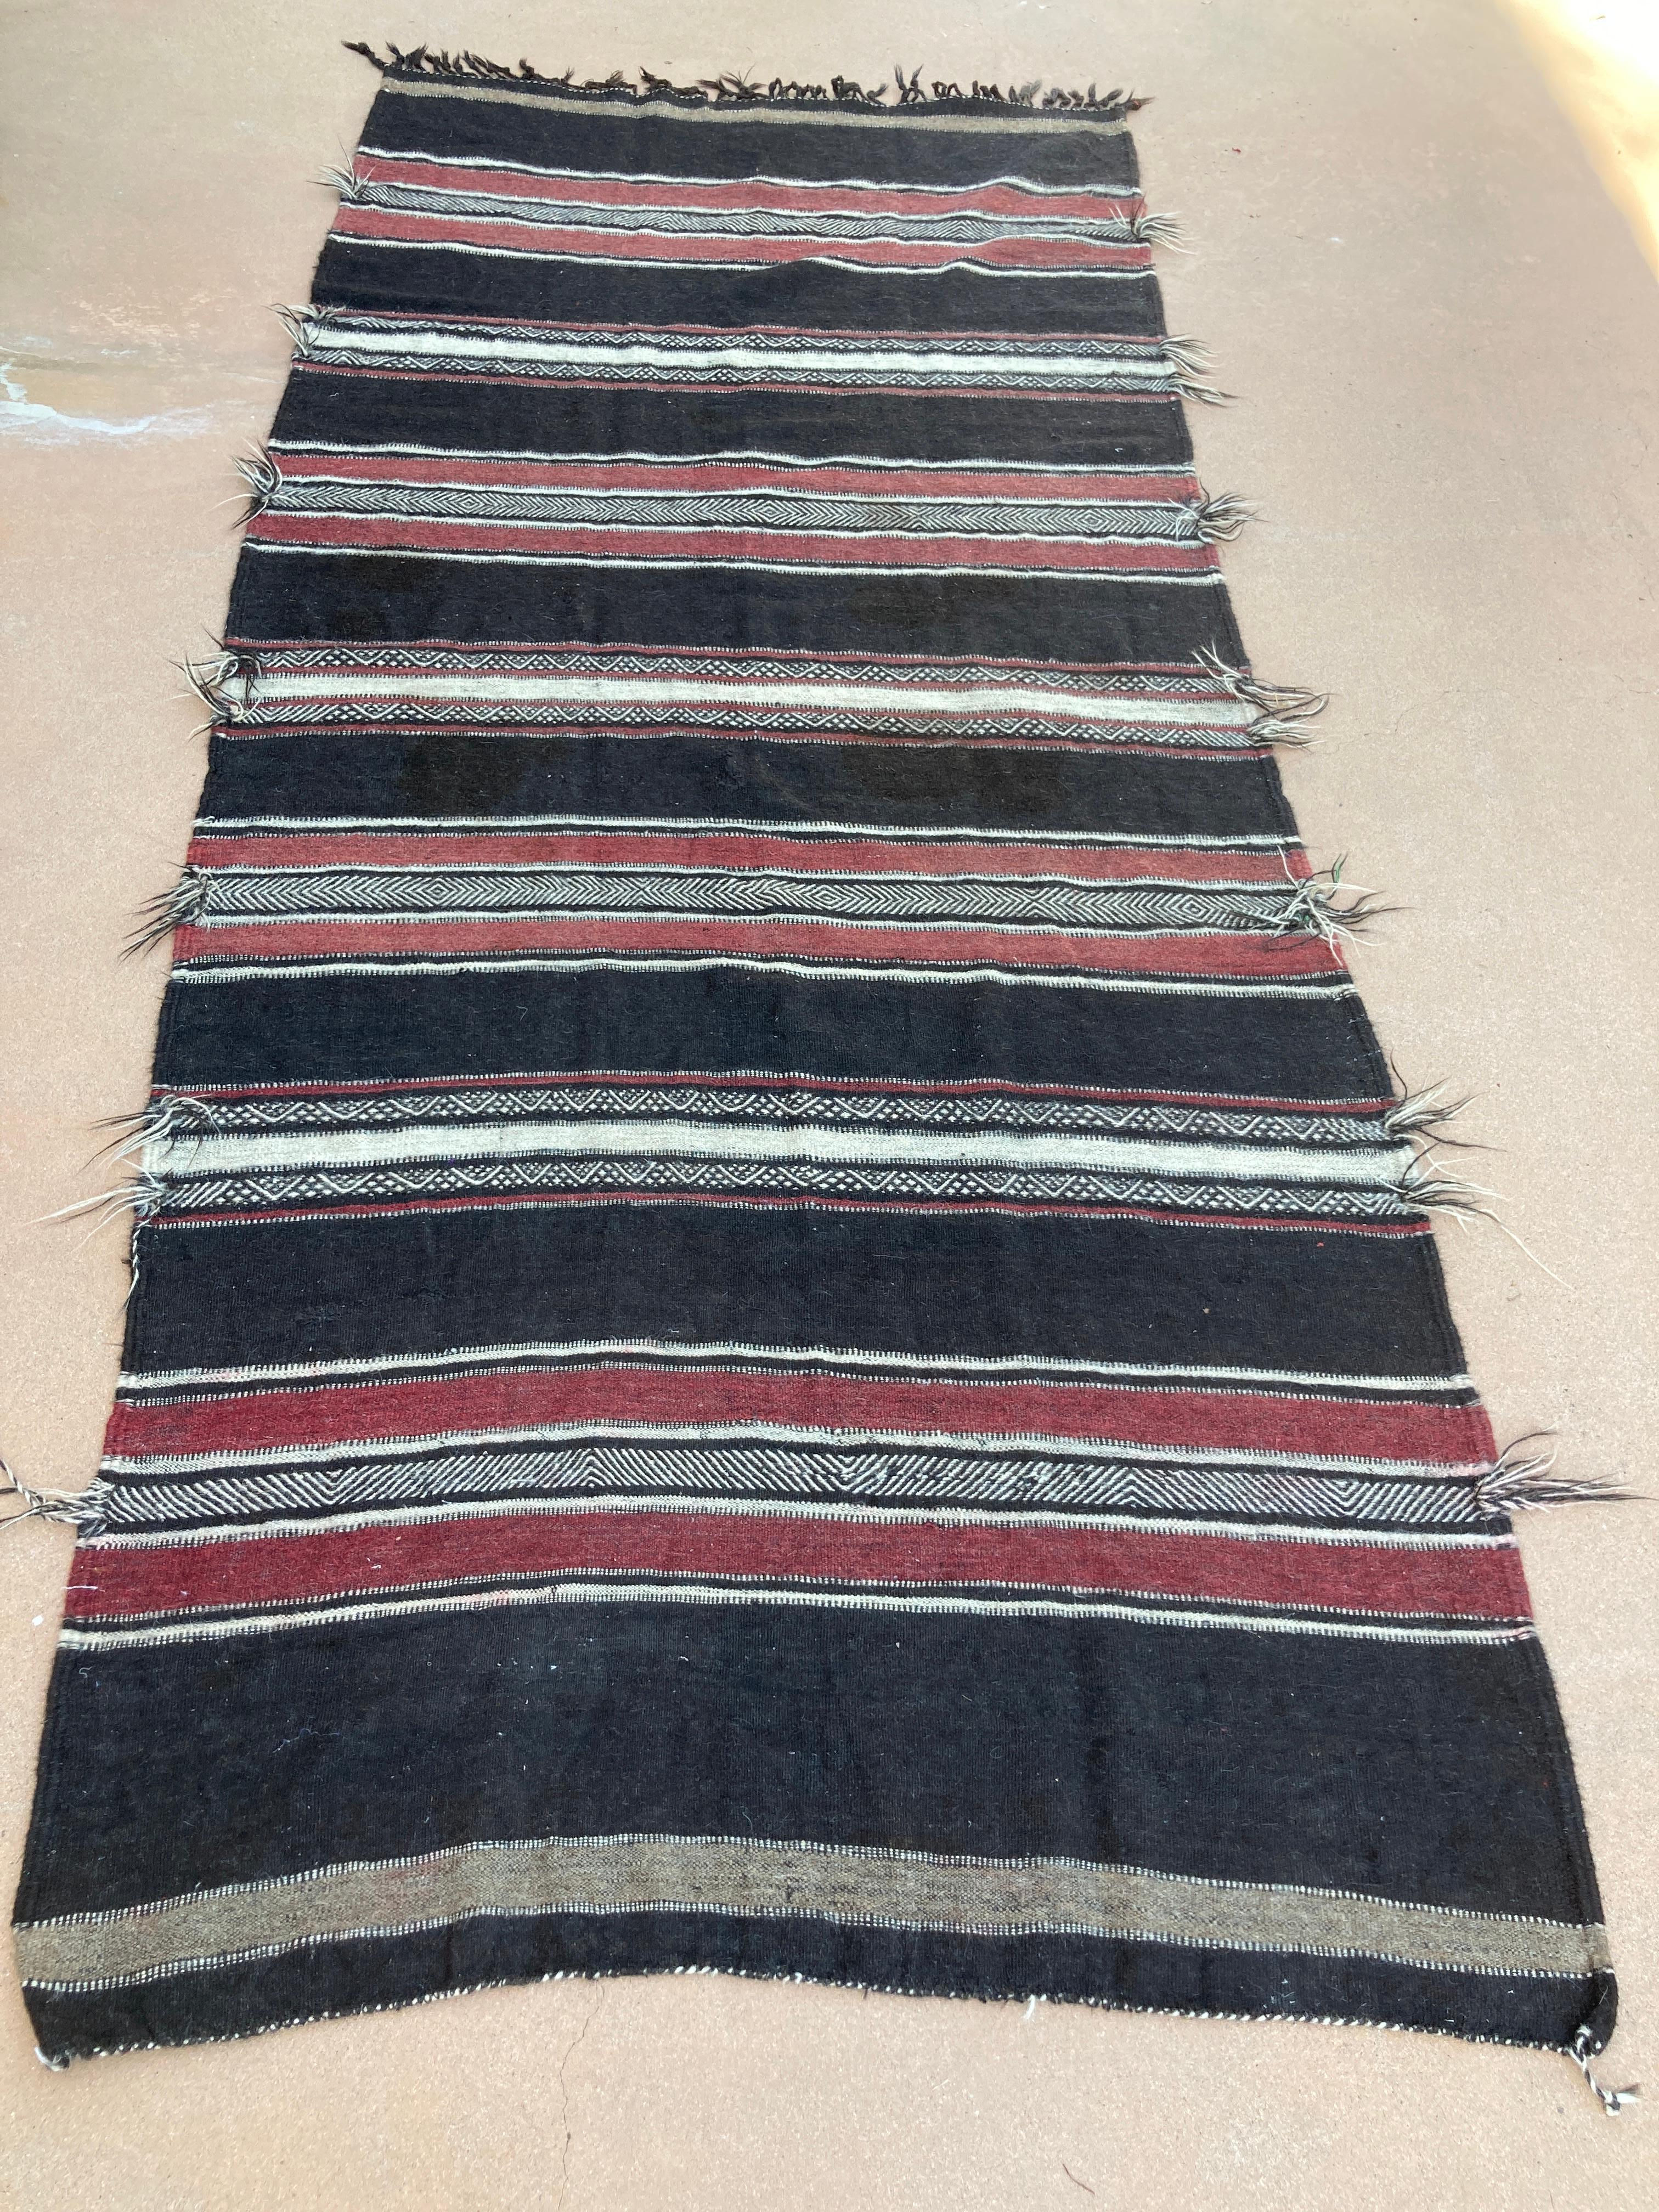 Vintage Moroccan flat-weave black camel hair Tribal rug.
Large size vintage Moroccan black camel hair ethnic nomadic rug, handwoven by Berber women in south Morocco for their own use.
This rug was made using flat-weave technique with linear pattern